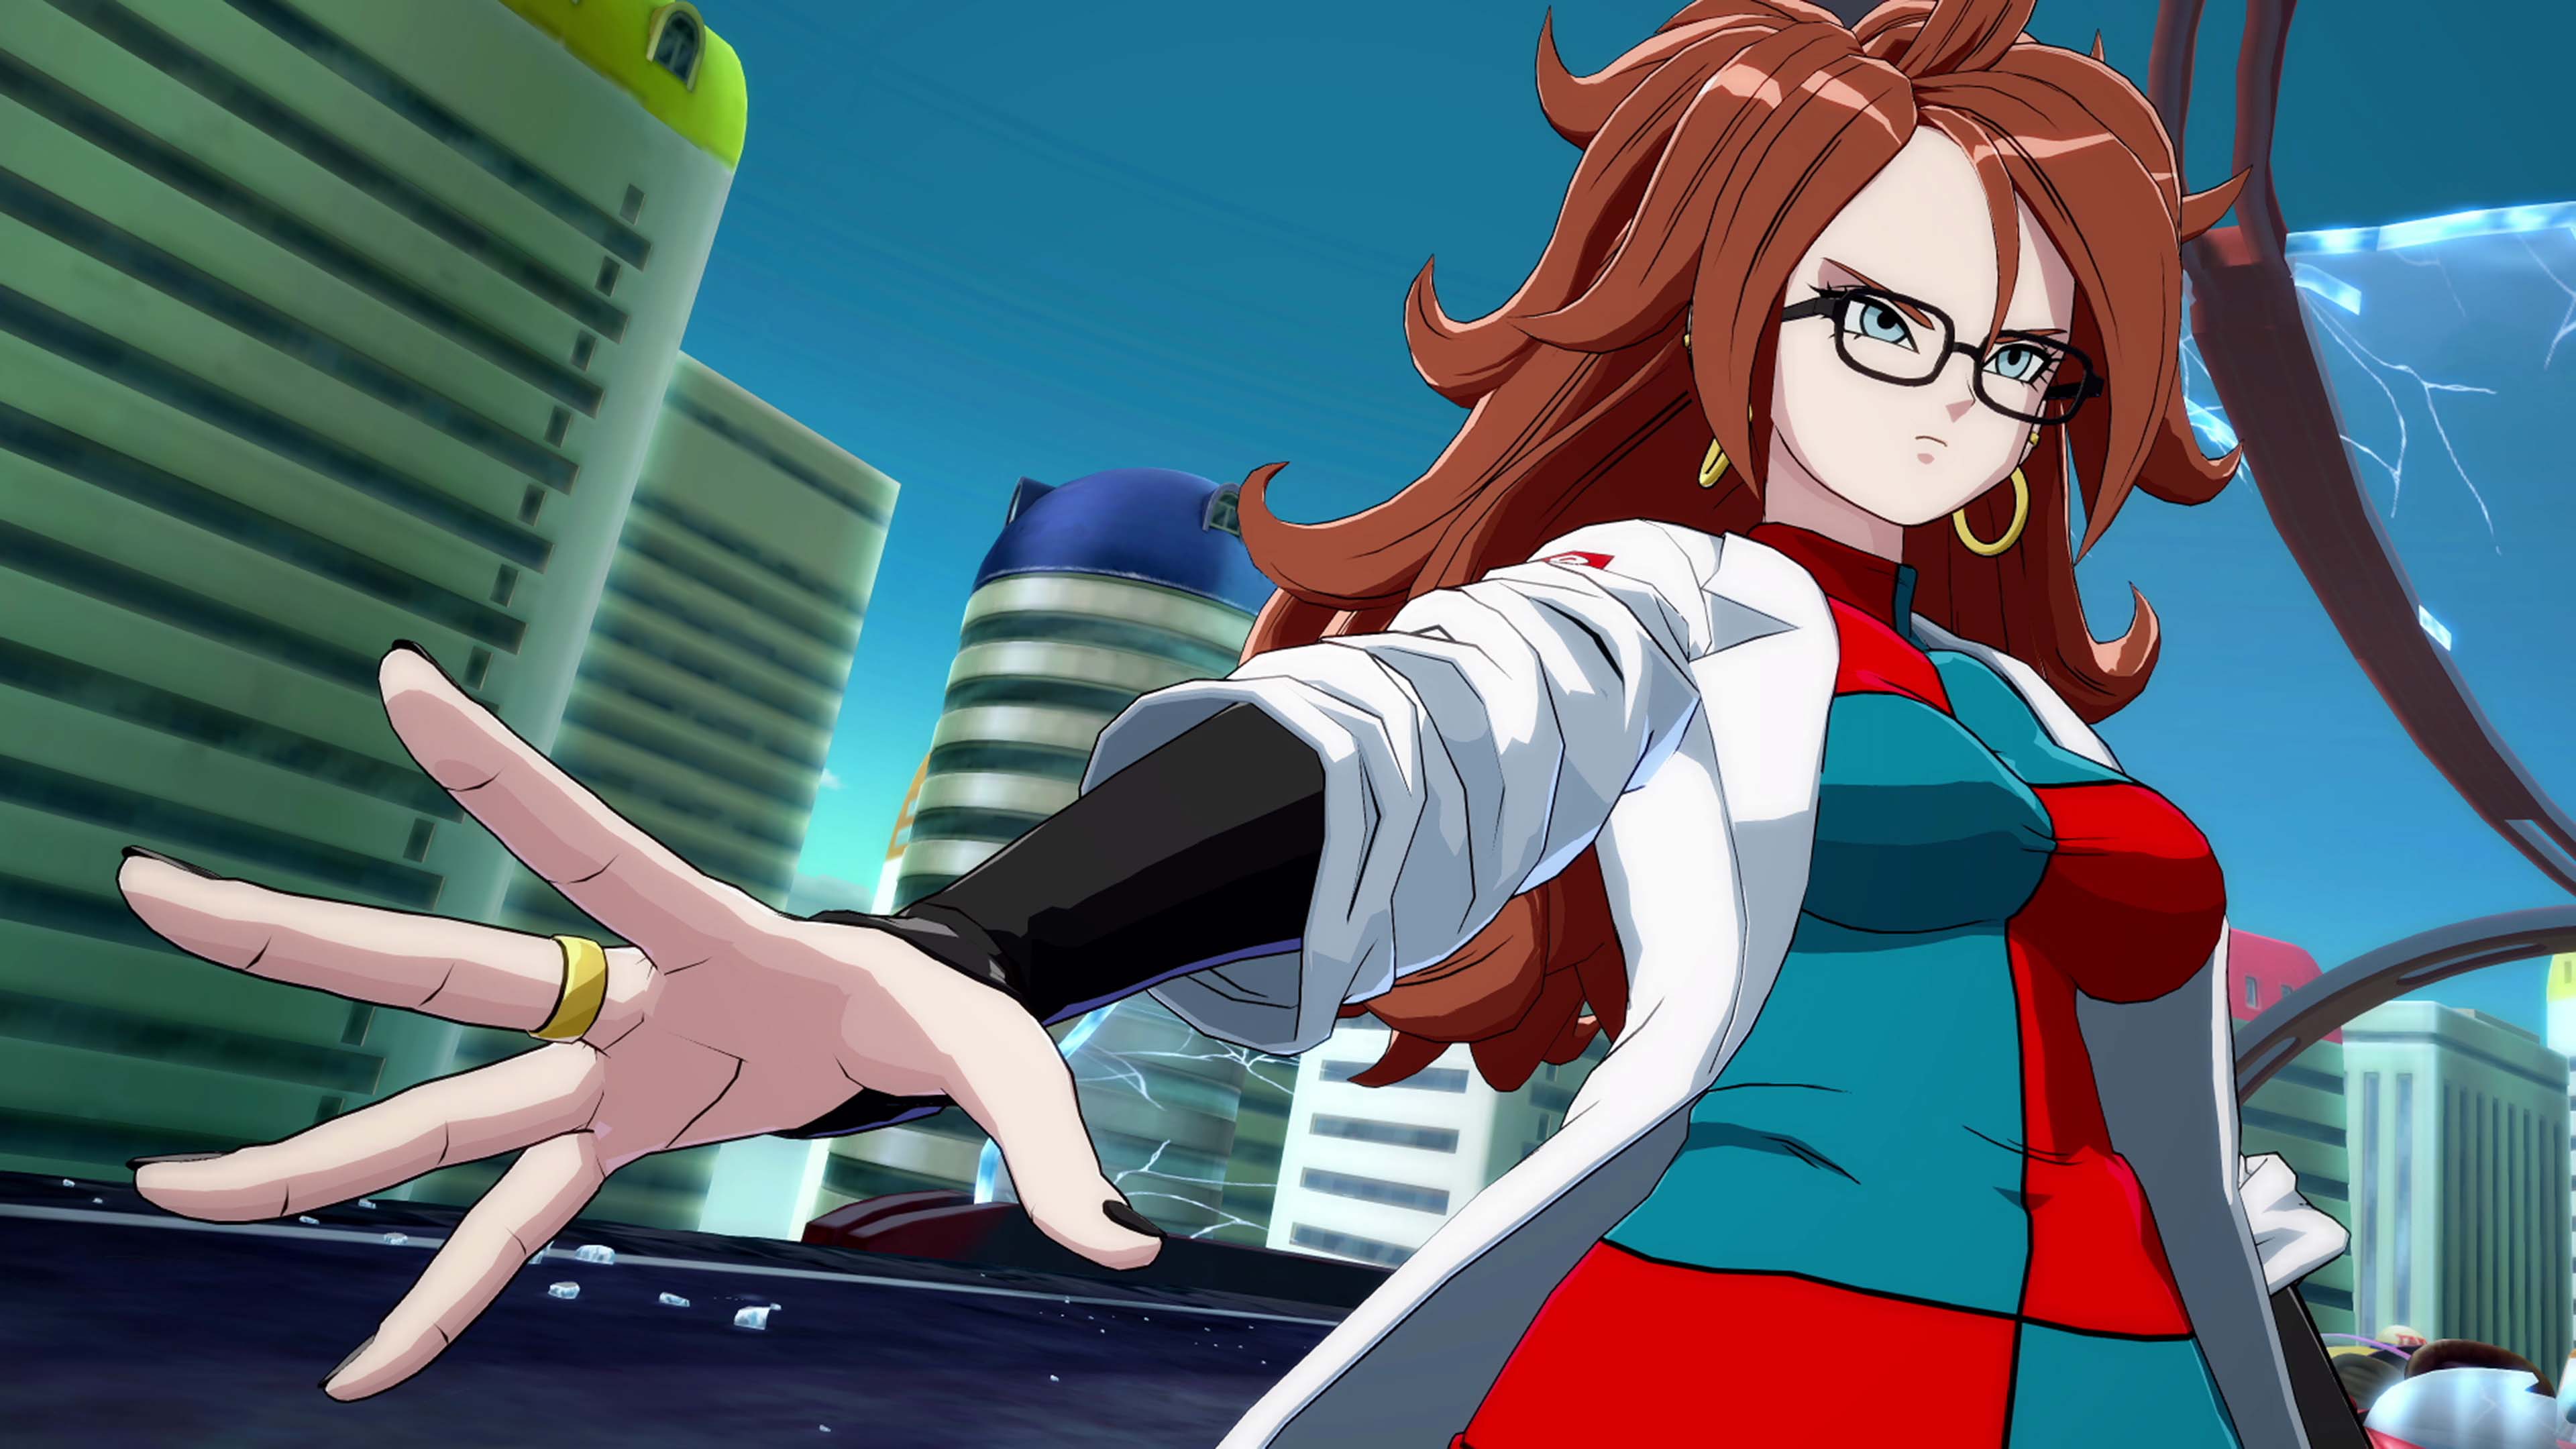 DRAGON BALL FIGHTERZ - Android 21 (Lab Coat)